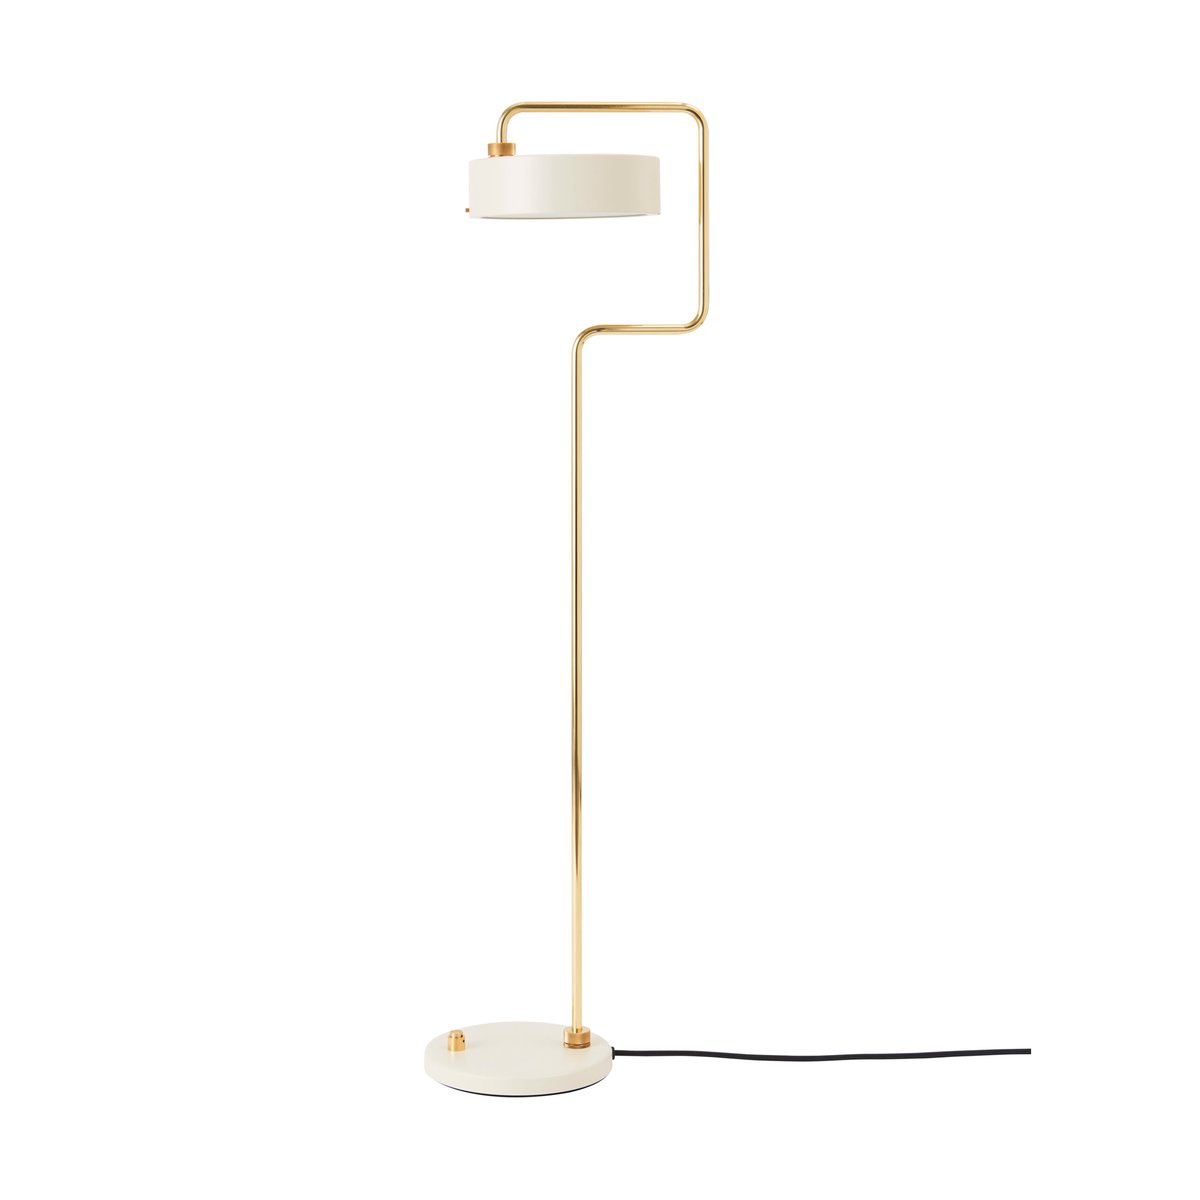 Made By Hand Petite Machine vloerlamp Oyster white